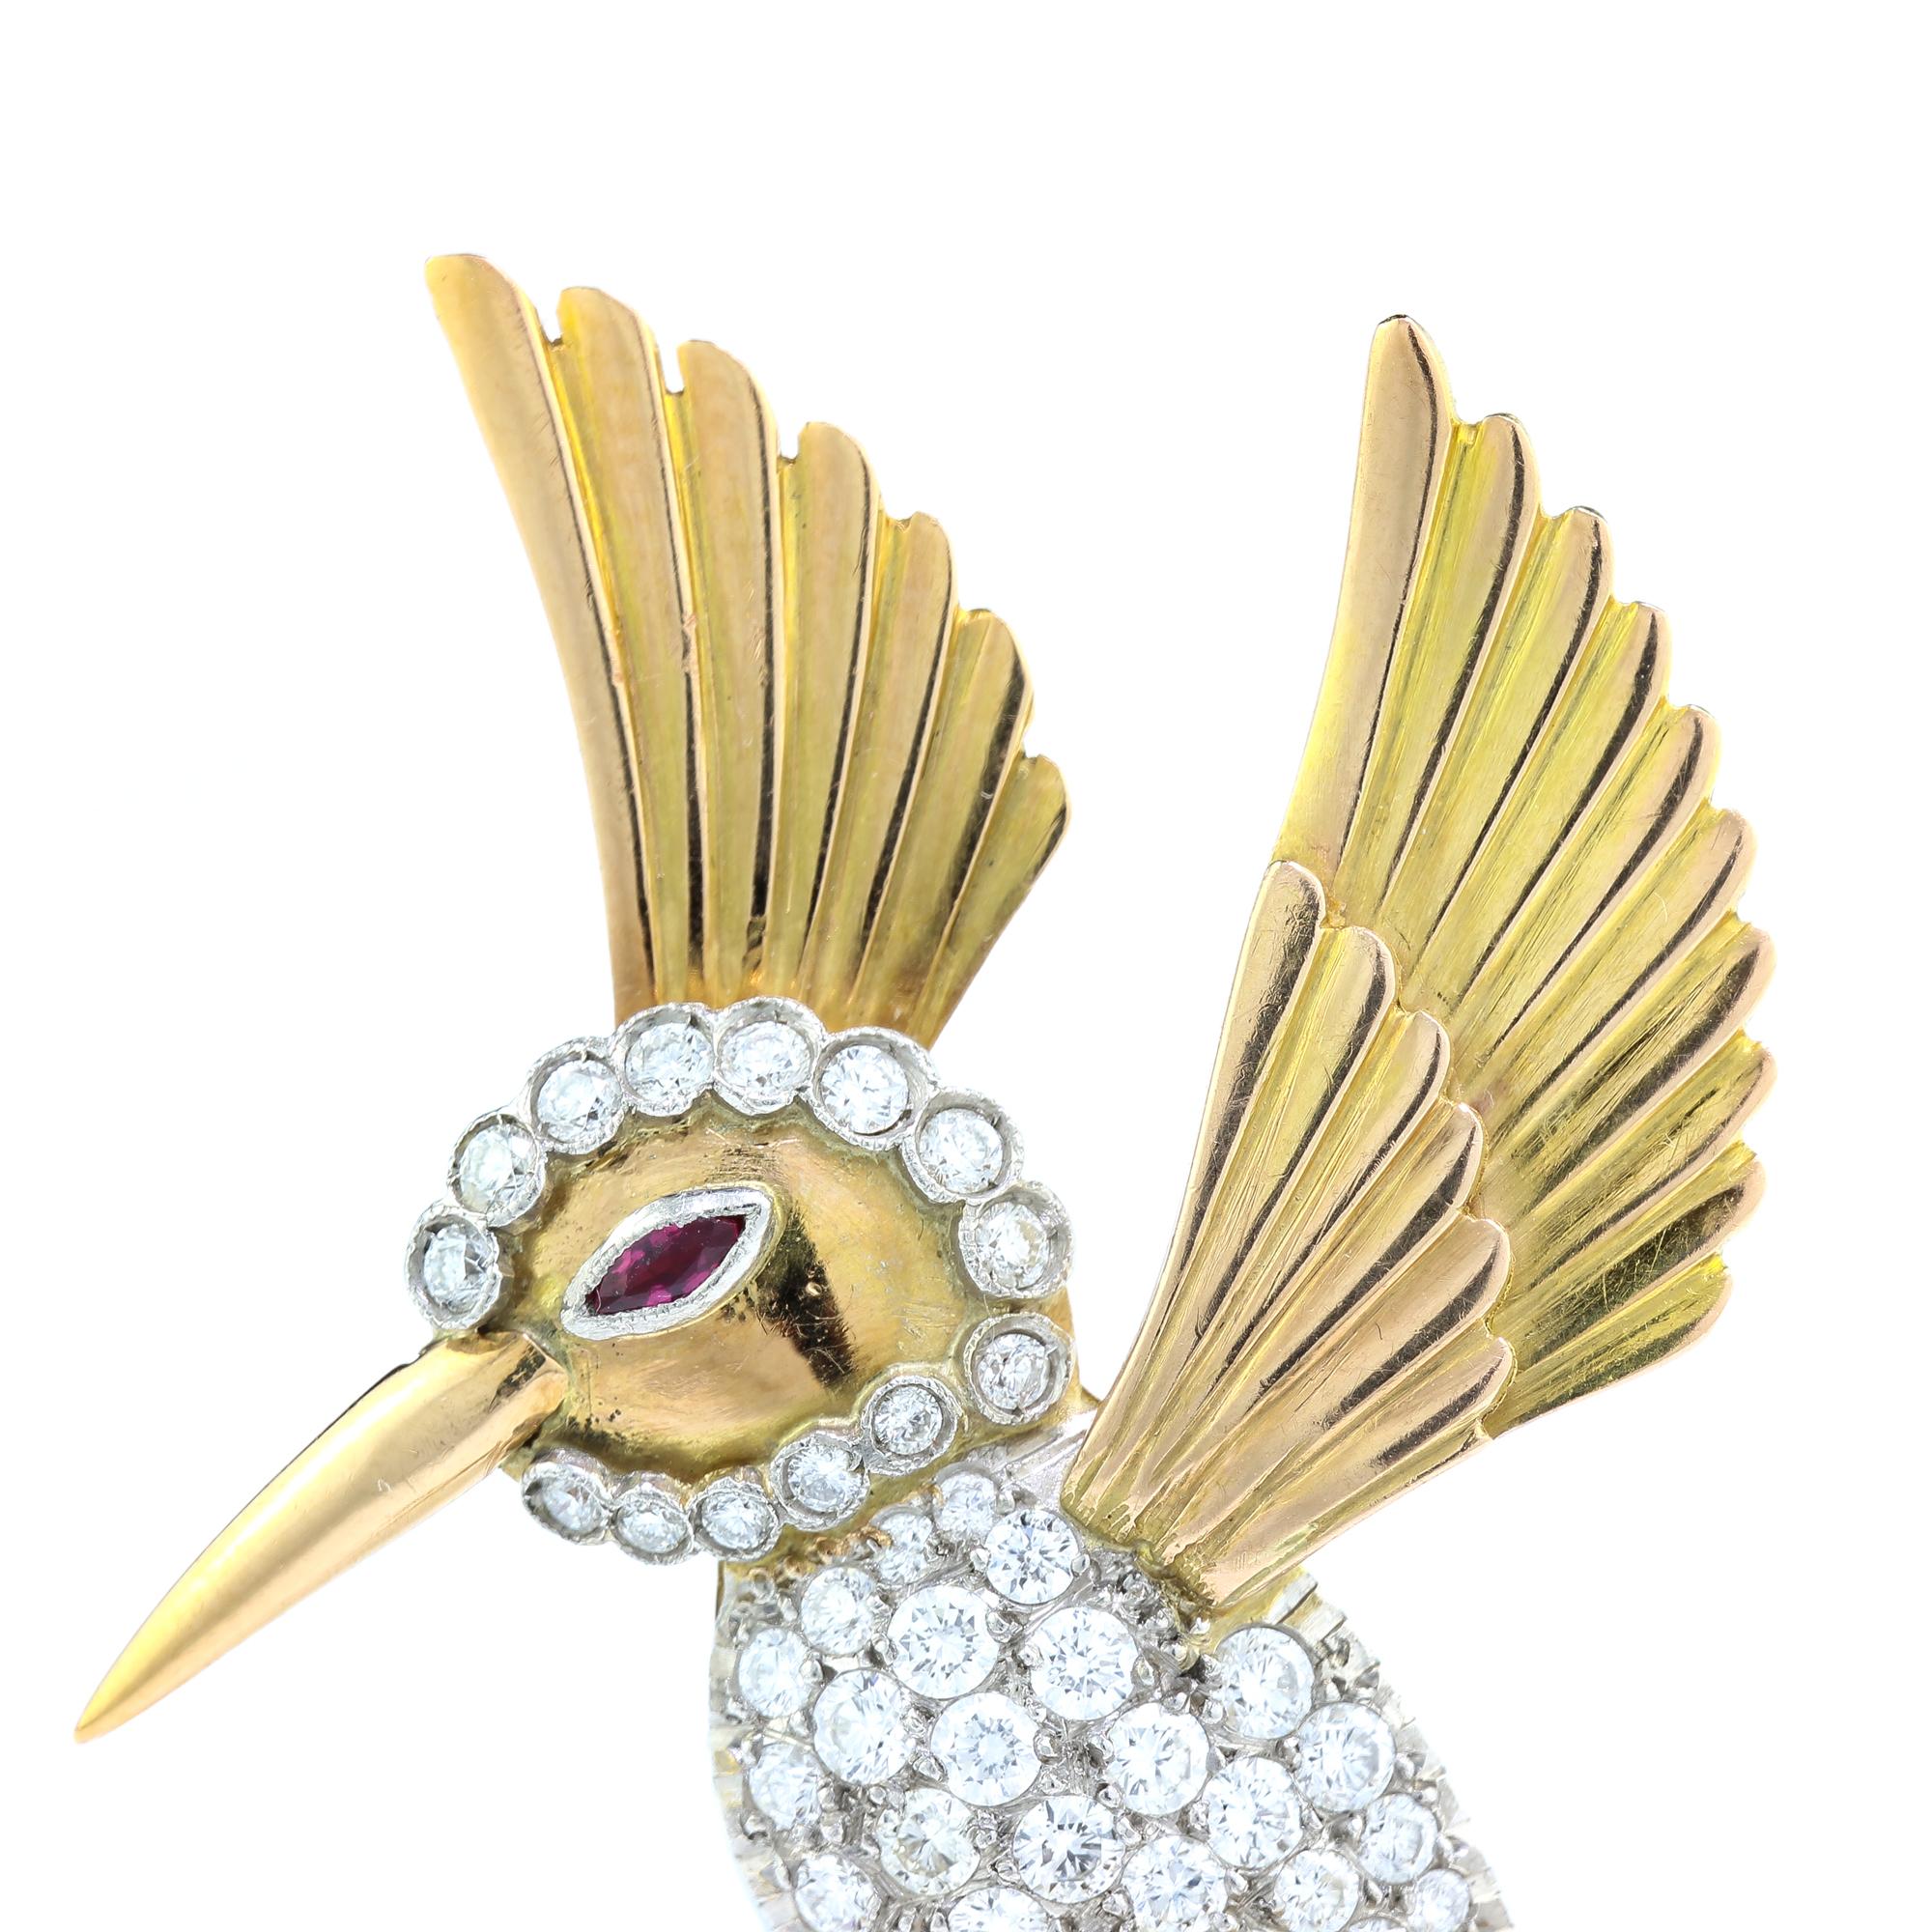 Vintage 18kt yellow gold hummingbird brooch with ruby eye and diamonds.
Made in 1950's
Tested positive for 18kt gold.

Dimensions - 
Size: 5.3 x 3.5 x 1.5 cm
Weight : 13.64 grams

Diamonds -
Cut: Round brilliant cut
Quantity of stones: 47
Approx